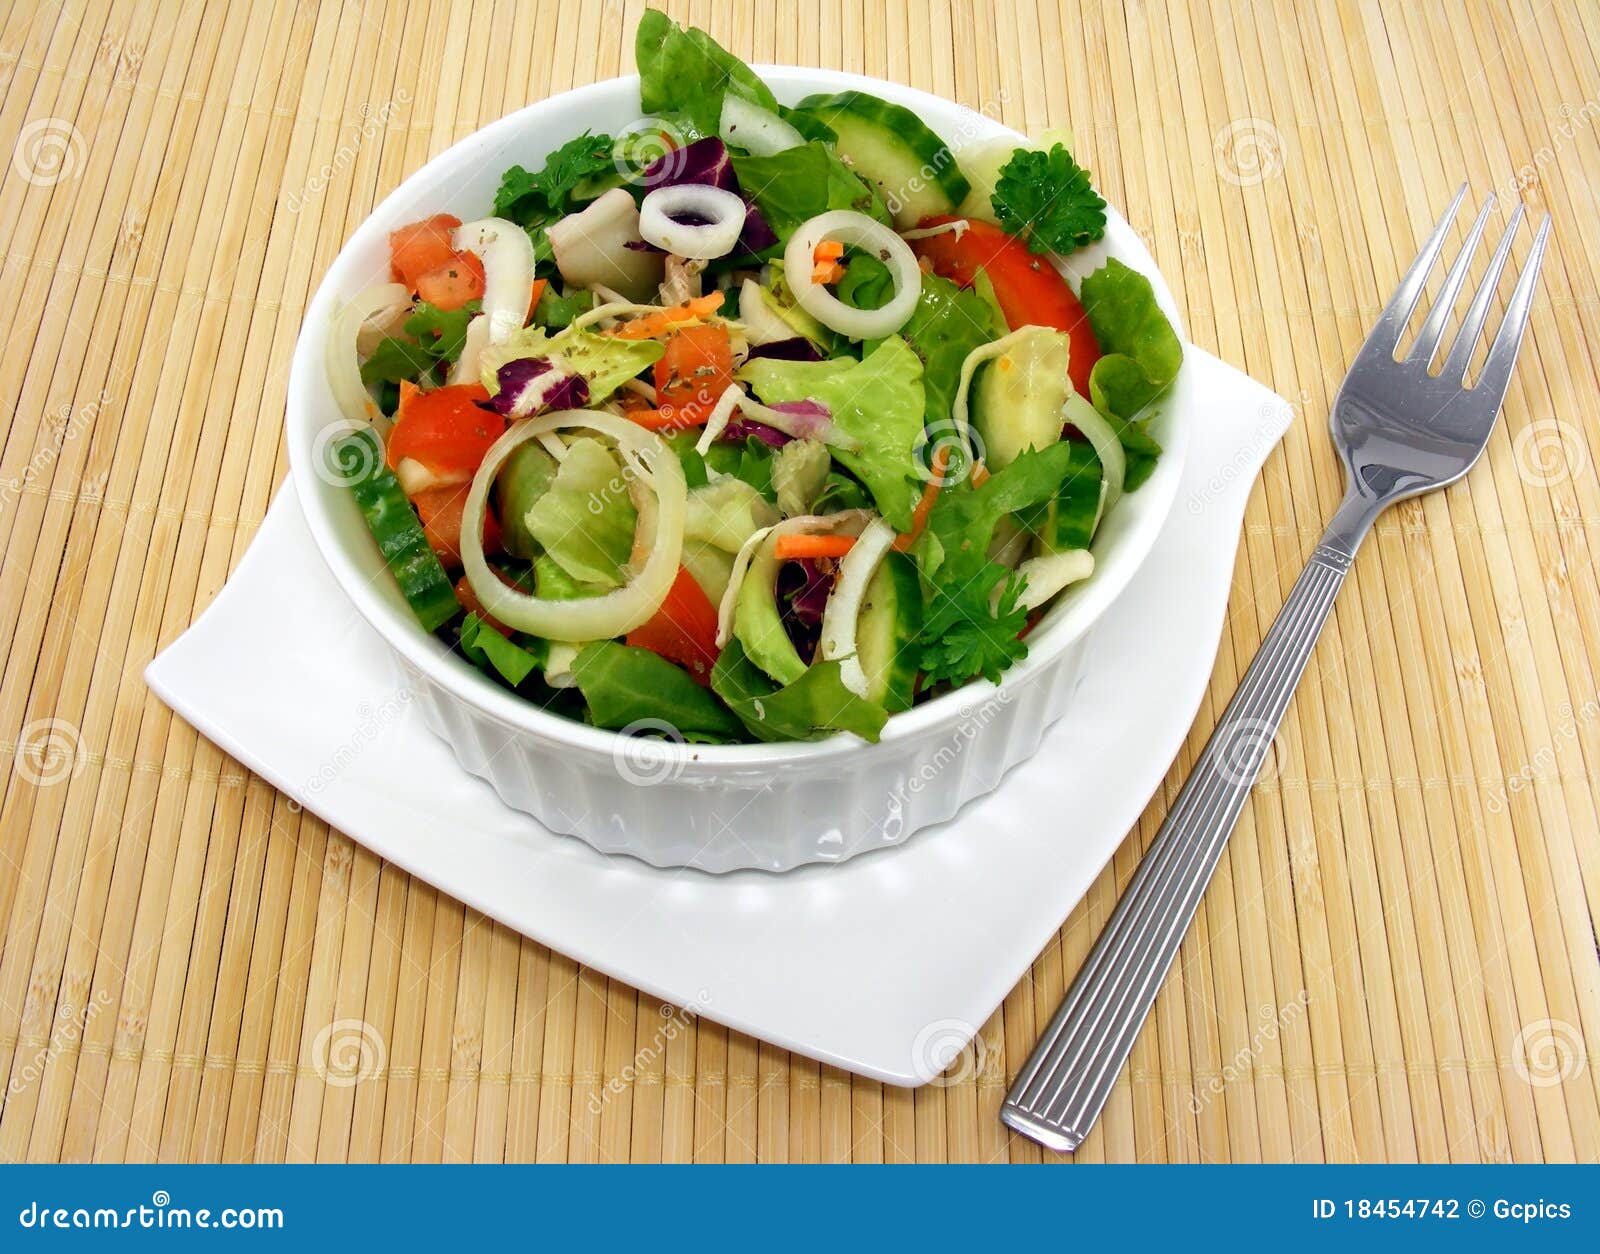 A mixed salad in a basket stock photo. Image of ingredient - 18454742